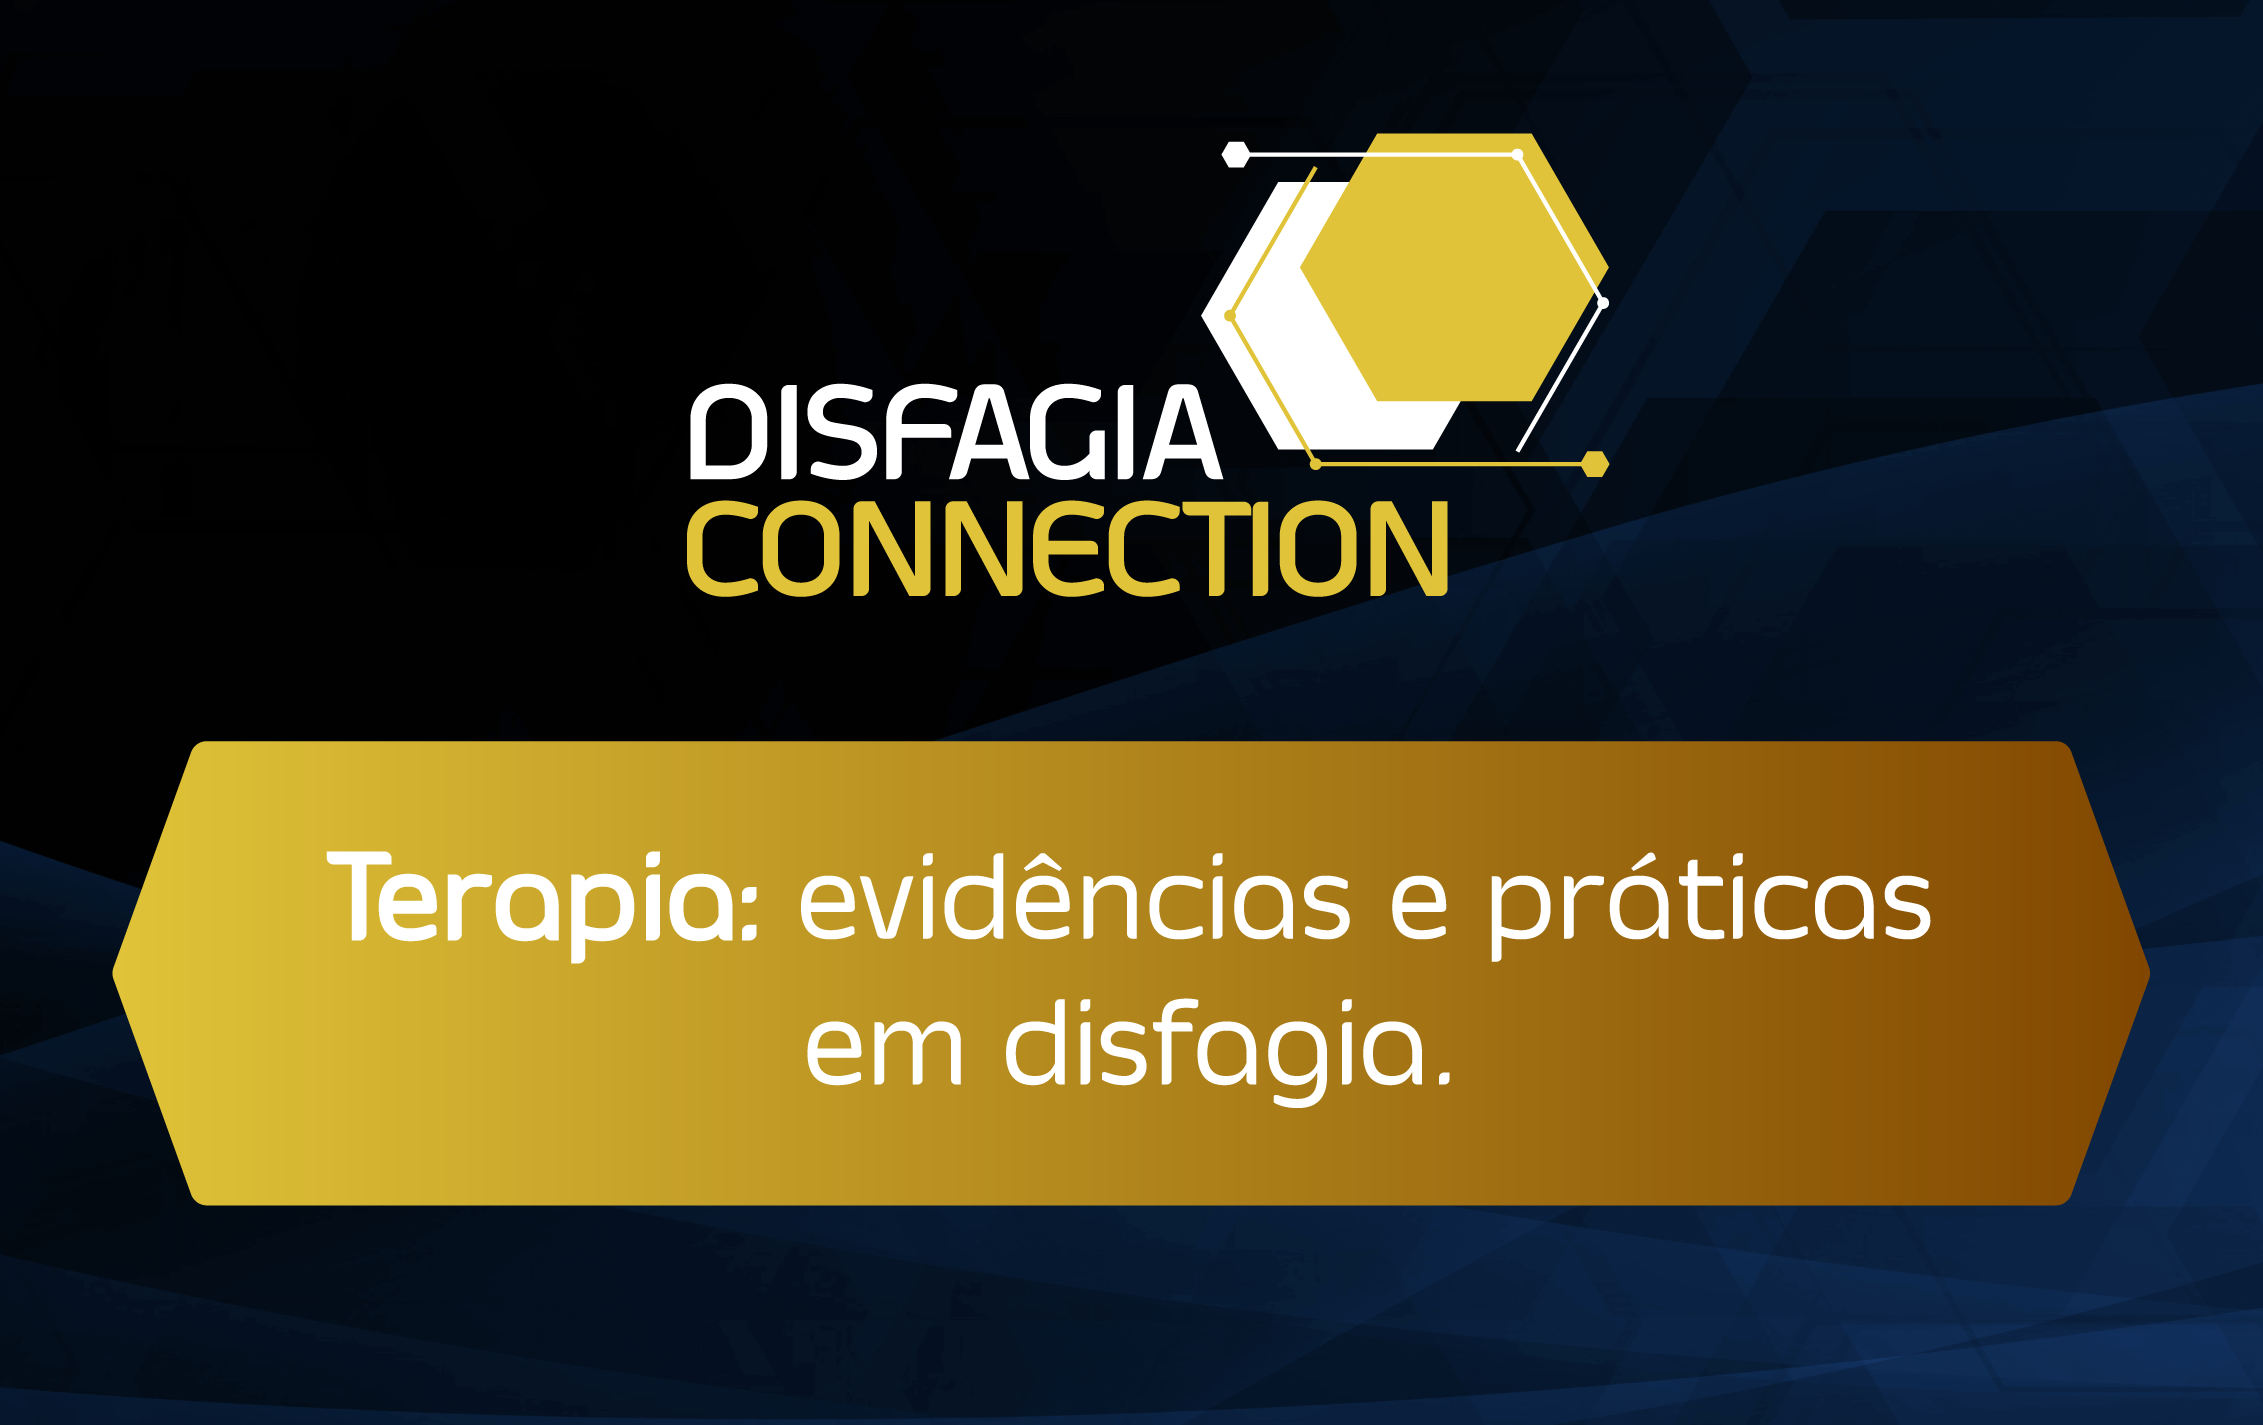 Disfagia Connection: 30/05